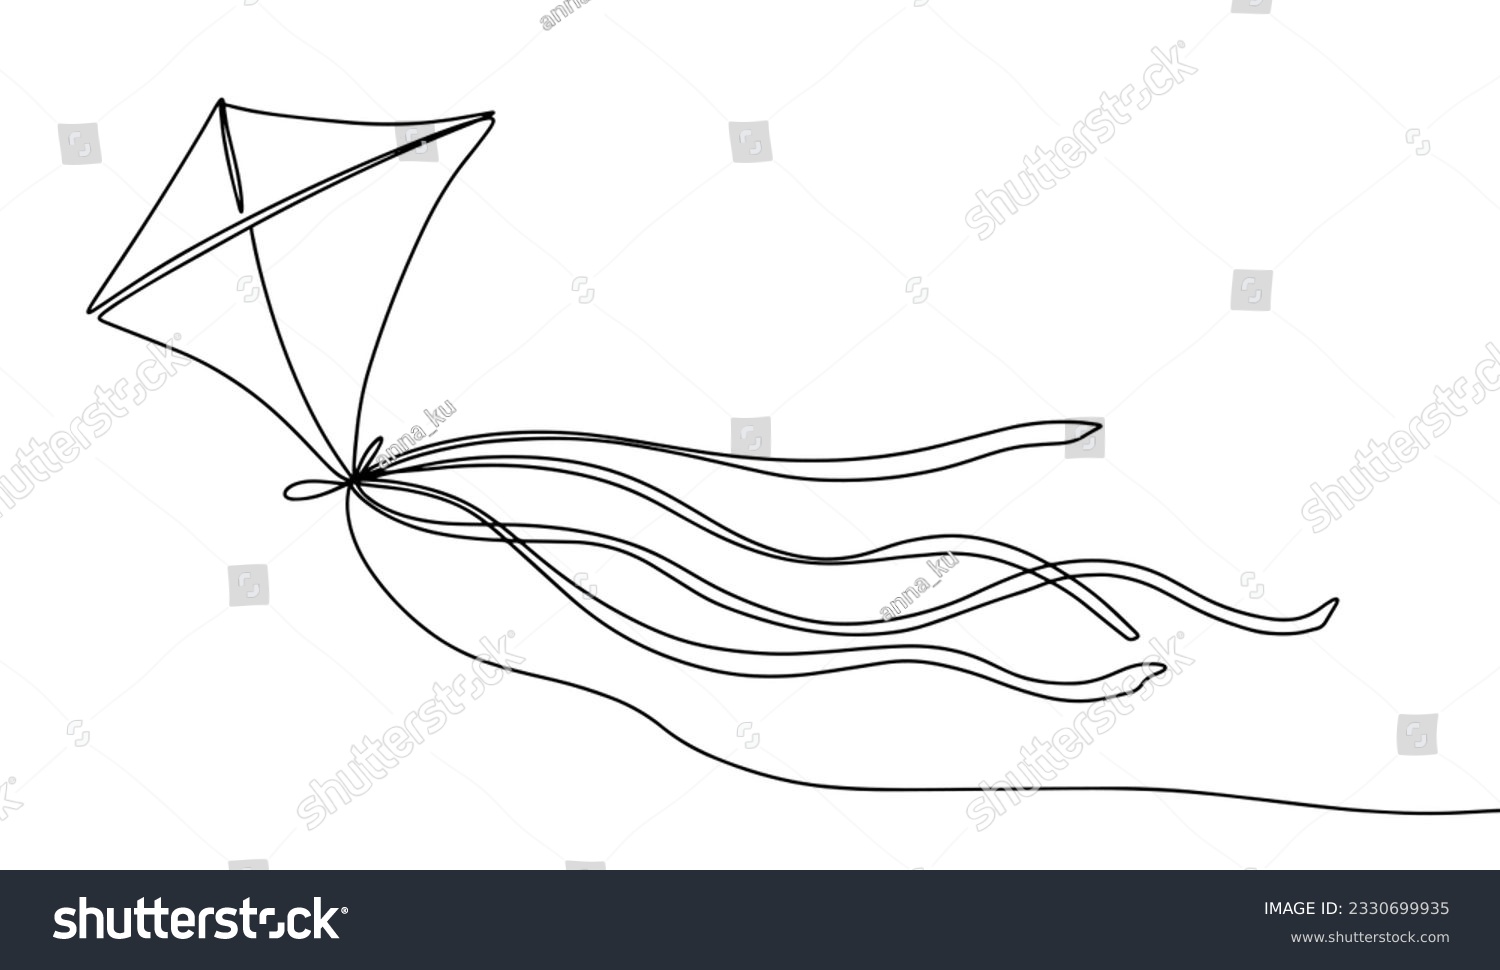 SVG of A kite with ribbons rushed into the sky. Fly in the wind. International Kite Day. One line drawing for different uses. Vector illustration. svg